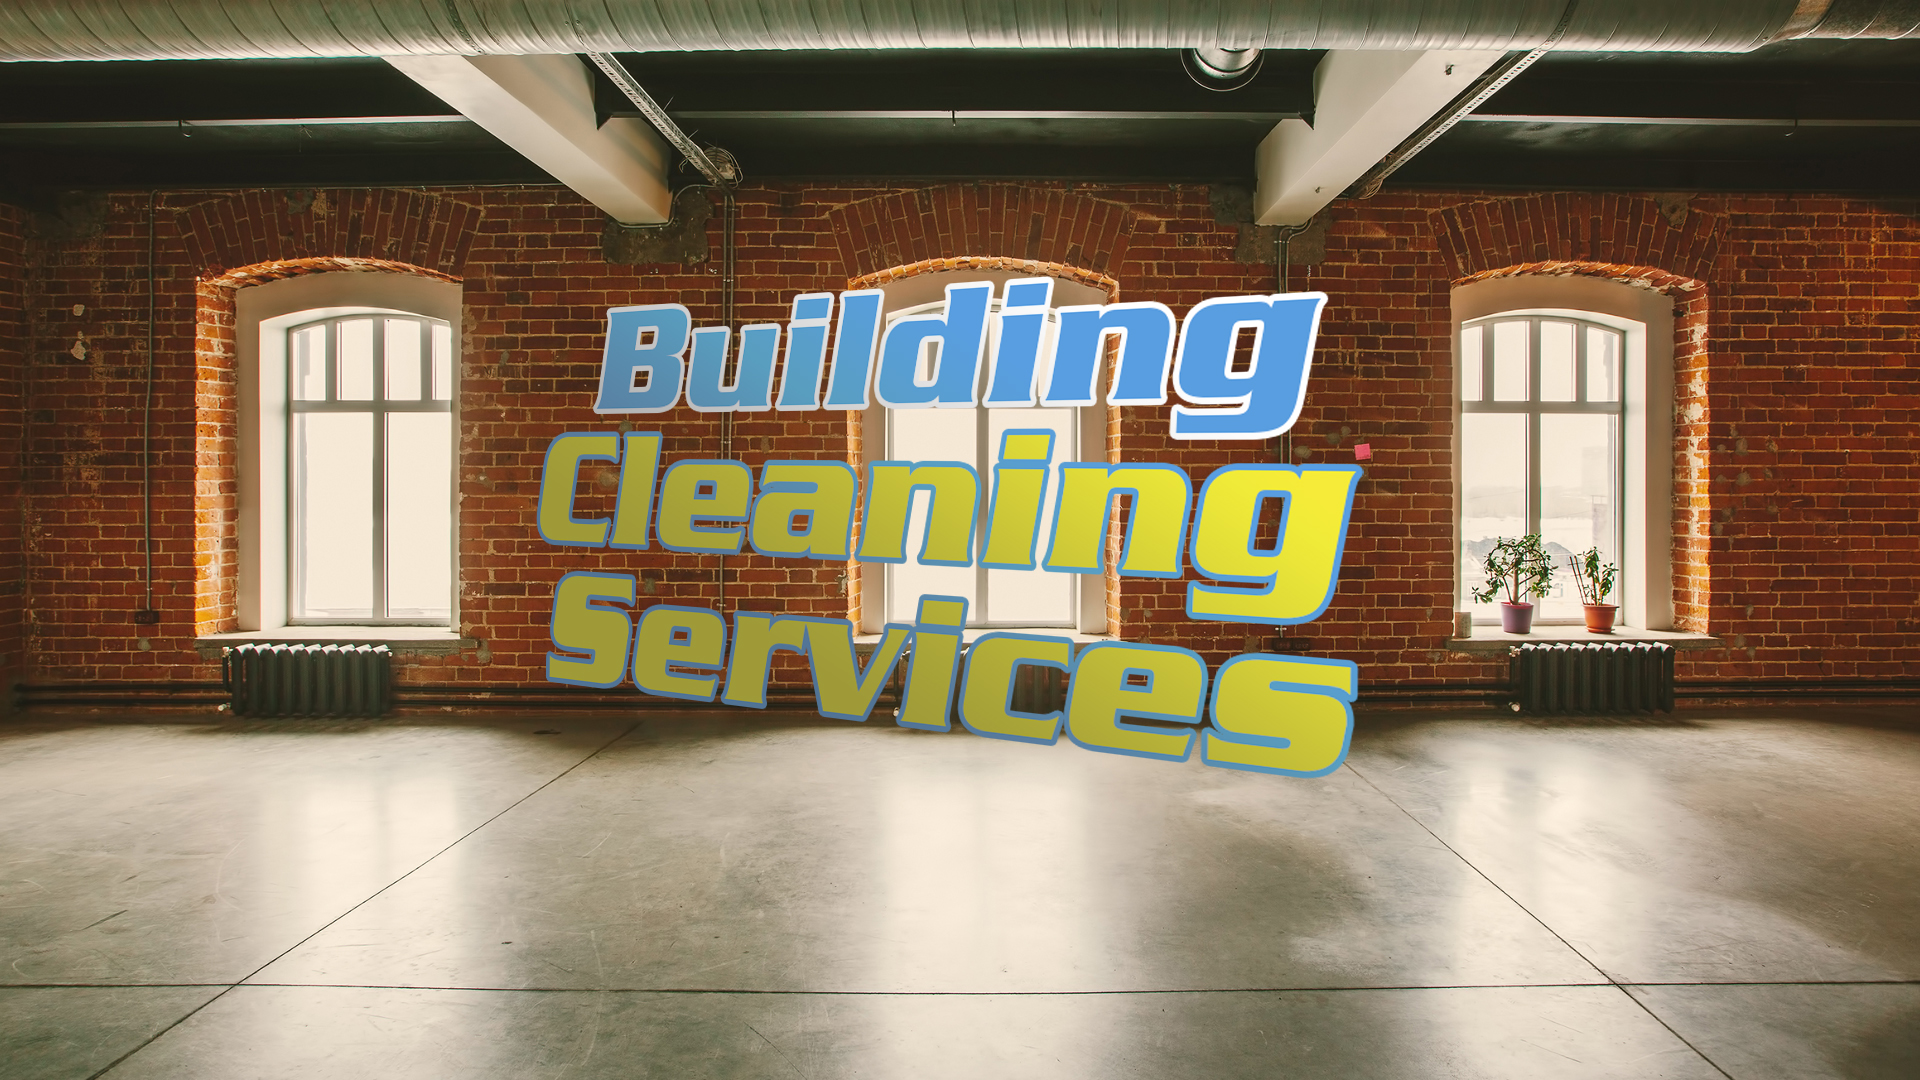 Palmetto House & Building Cleaning